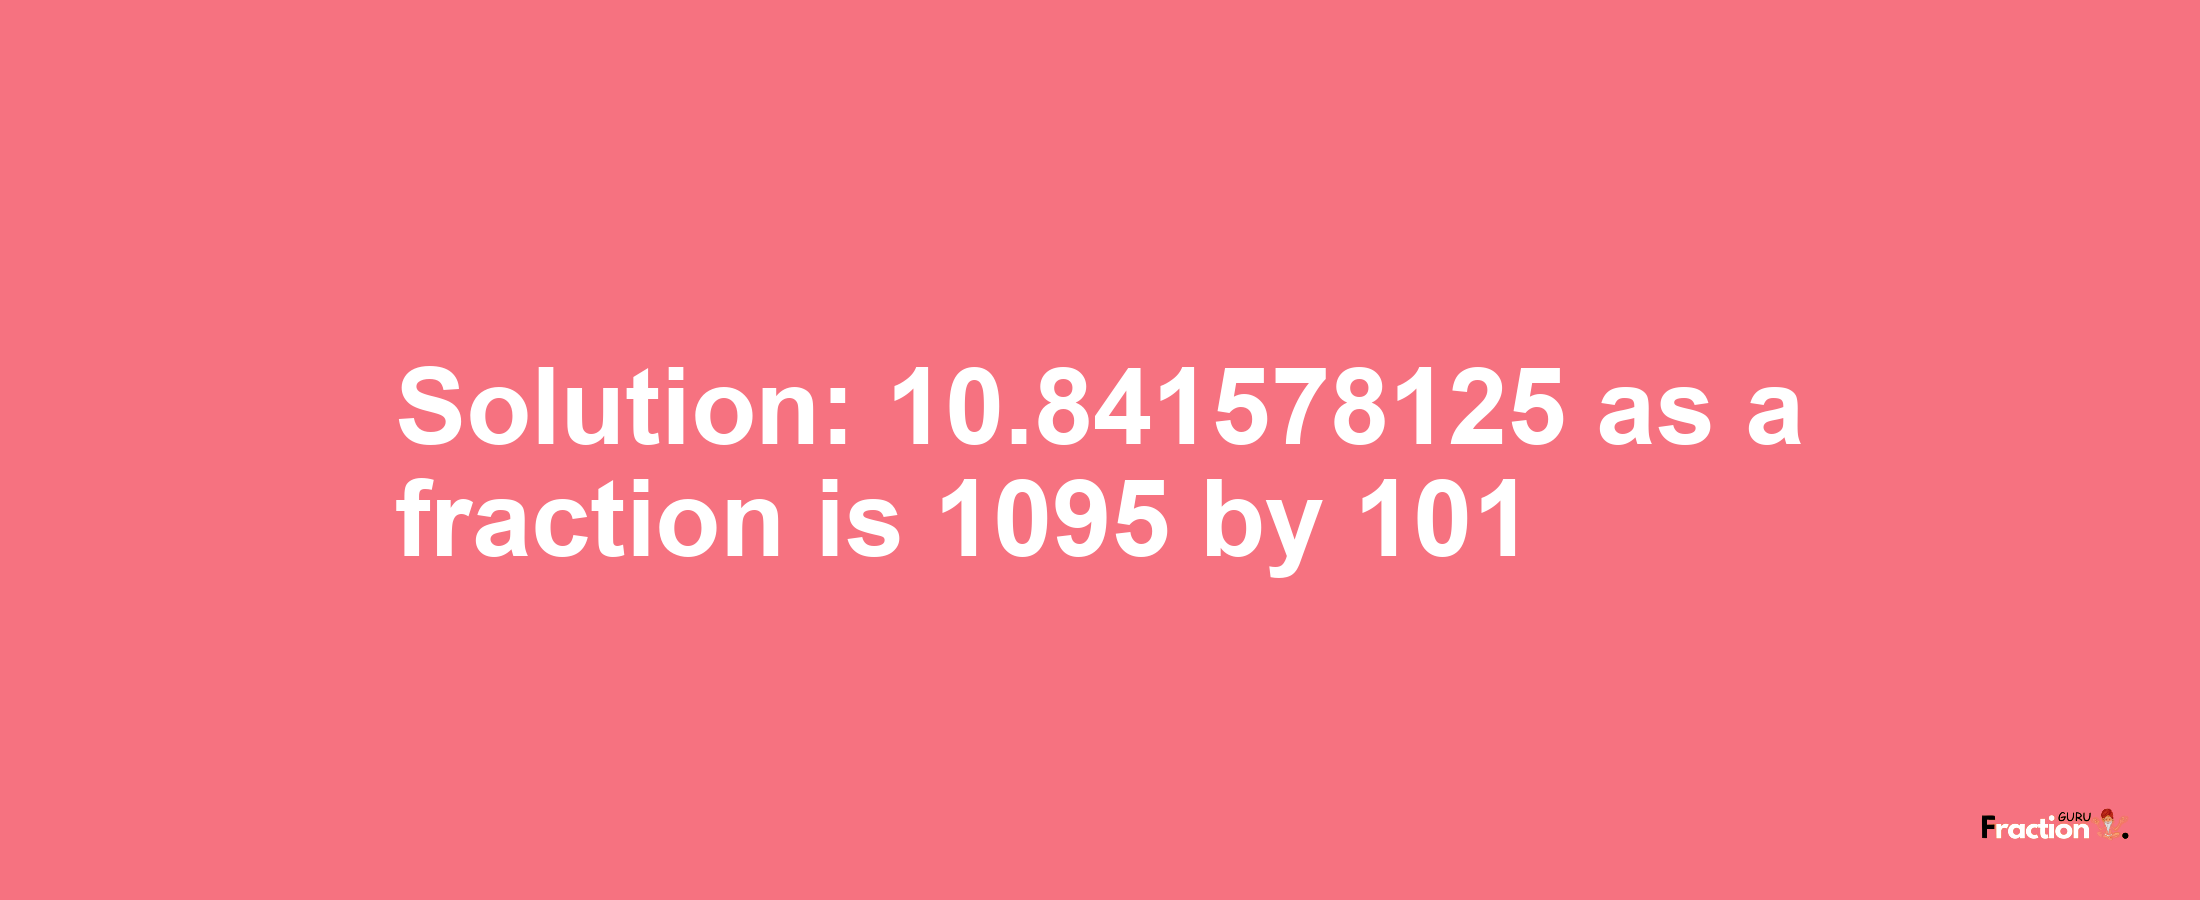 Solution:10.841578125 as a fraction is 1095/101